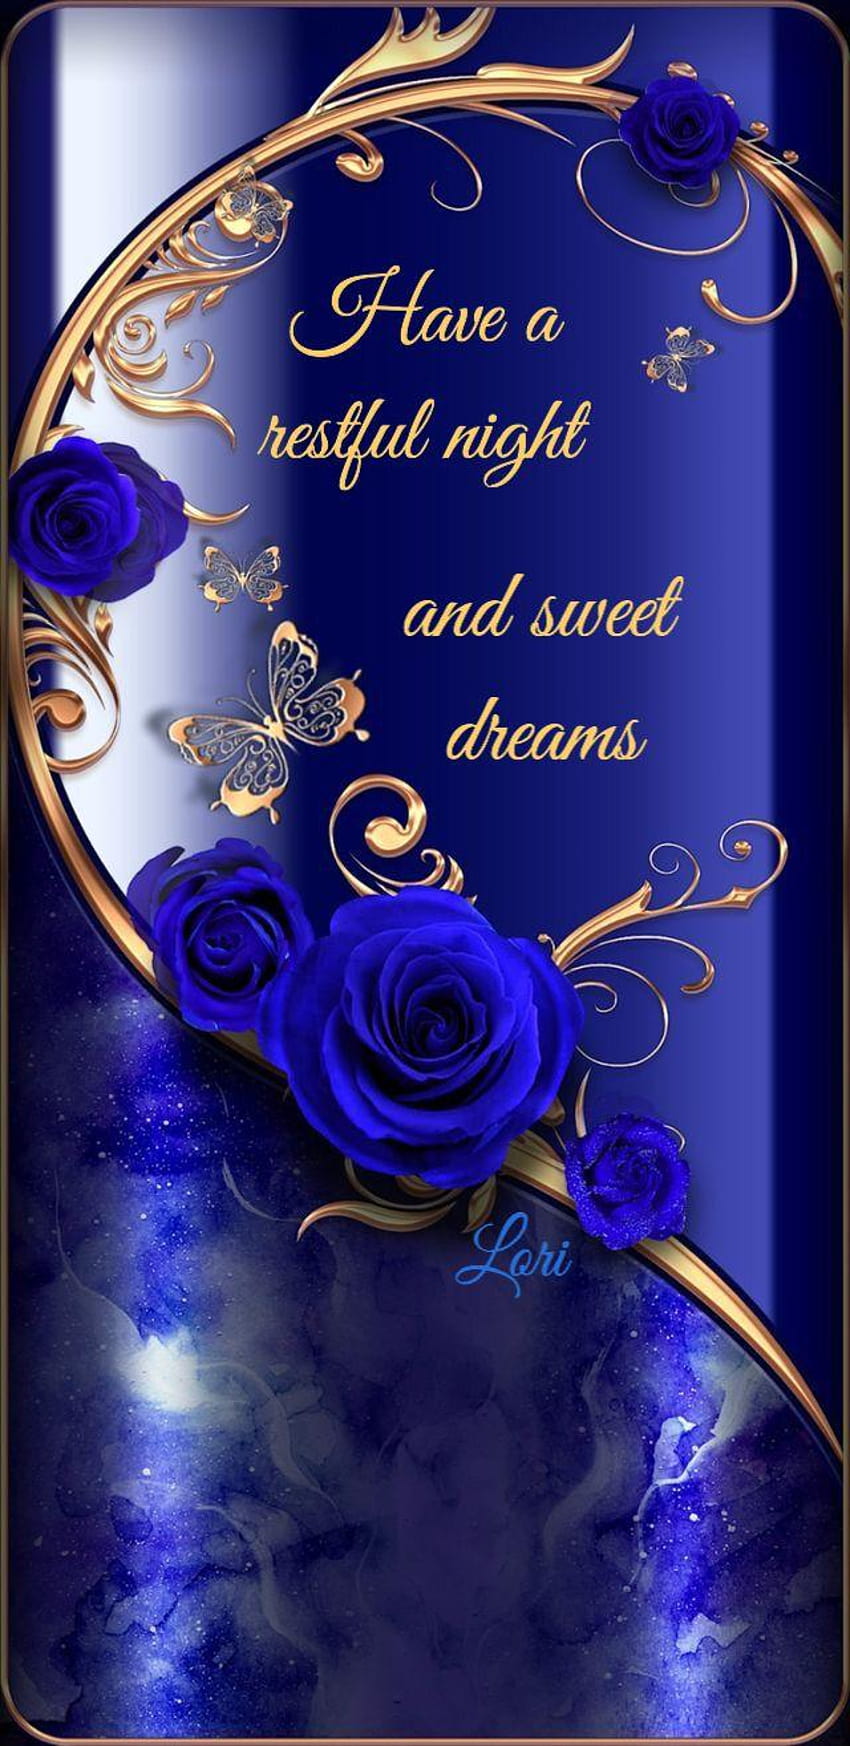 HAVE A RESTFUL NIGHT AND SWEET DREAMS., good night 2017 mobil HD ...